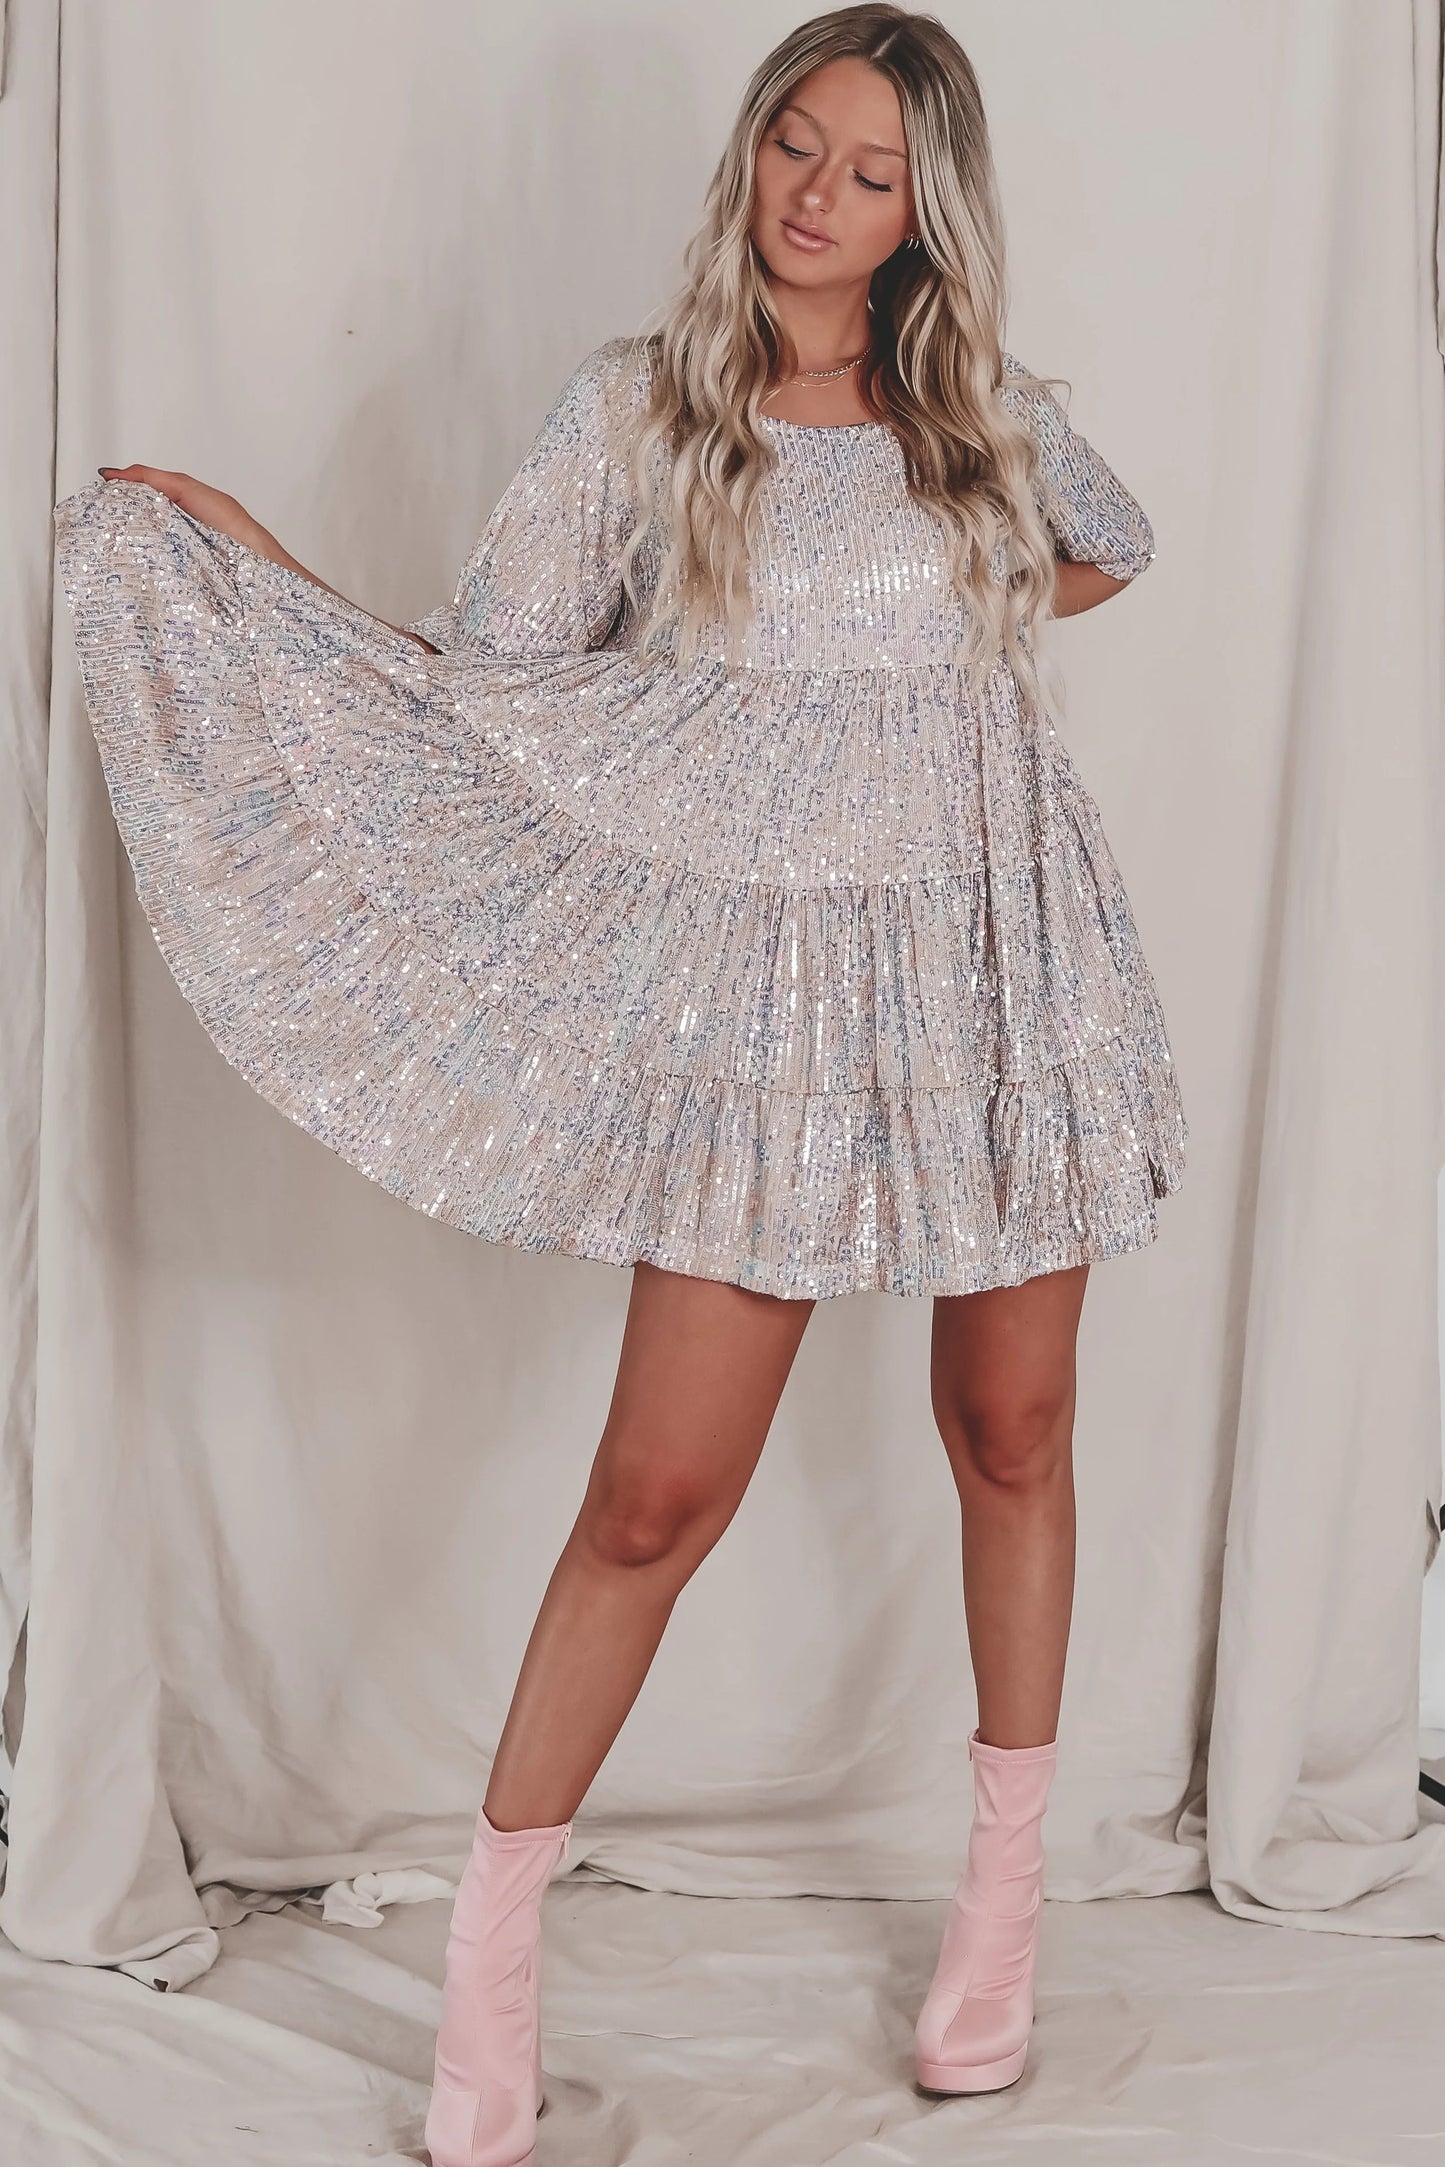 ✨Sequin Baby Doll Dress